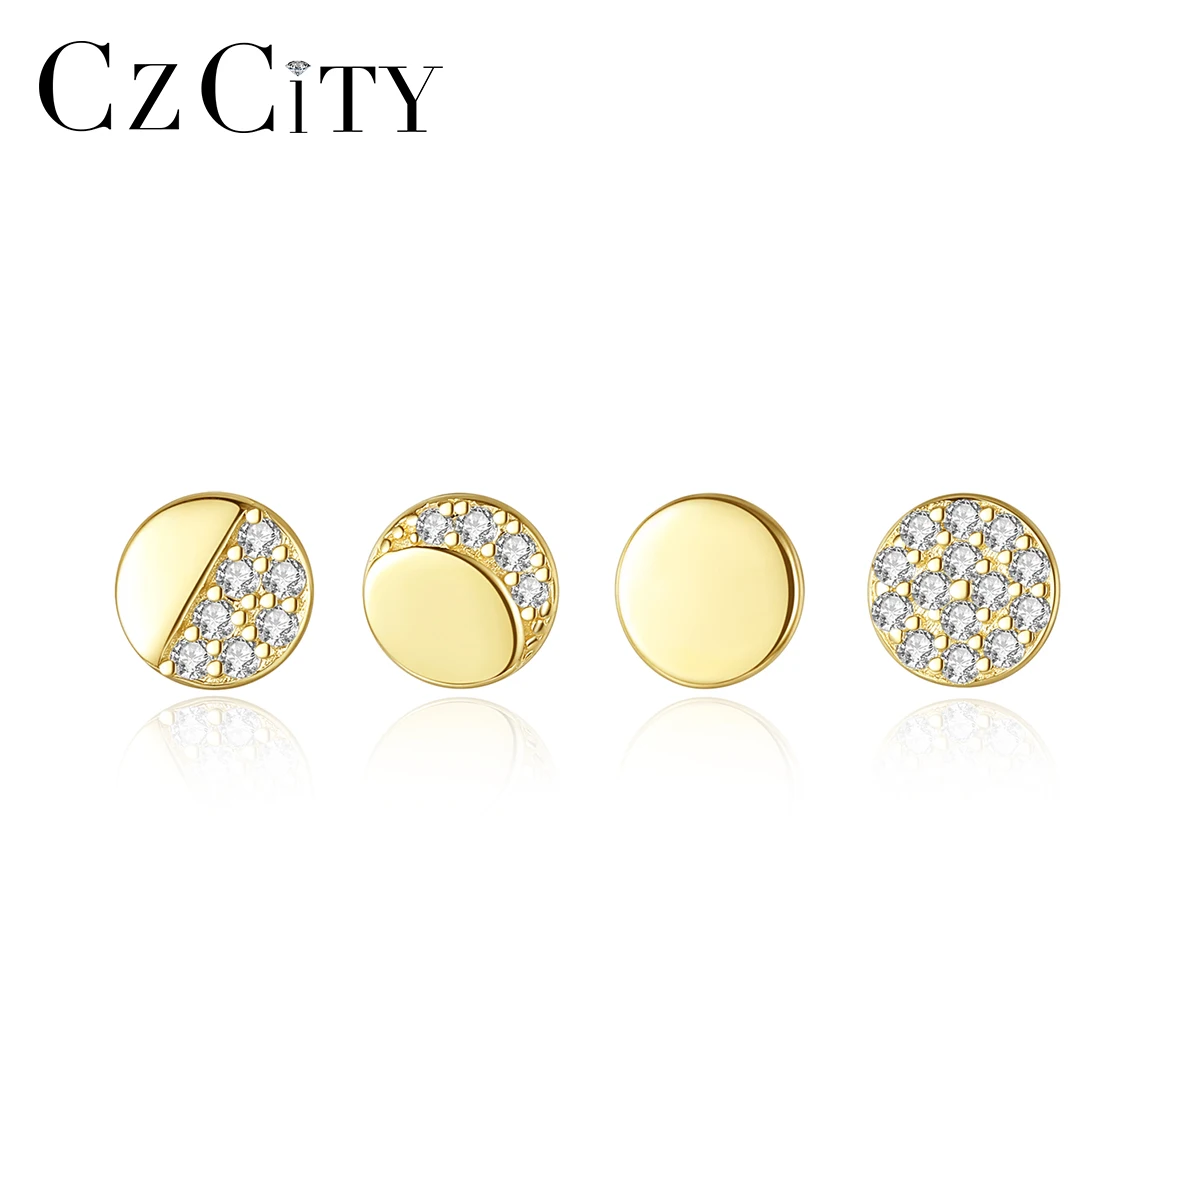 

CZCITY 925 Sterling Silver Plated 14K Gold Round Stud Earrings sets for Women Fine Jewelry CZ Boucle D'Oreille Femme Bijoux Gift